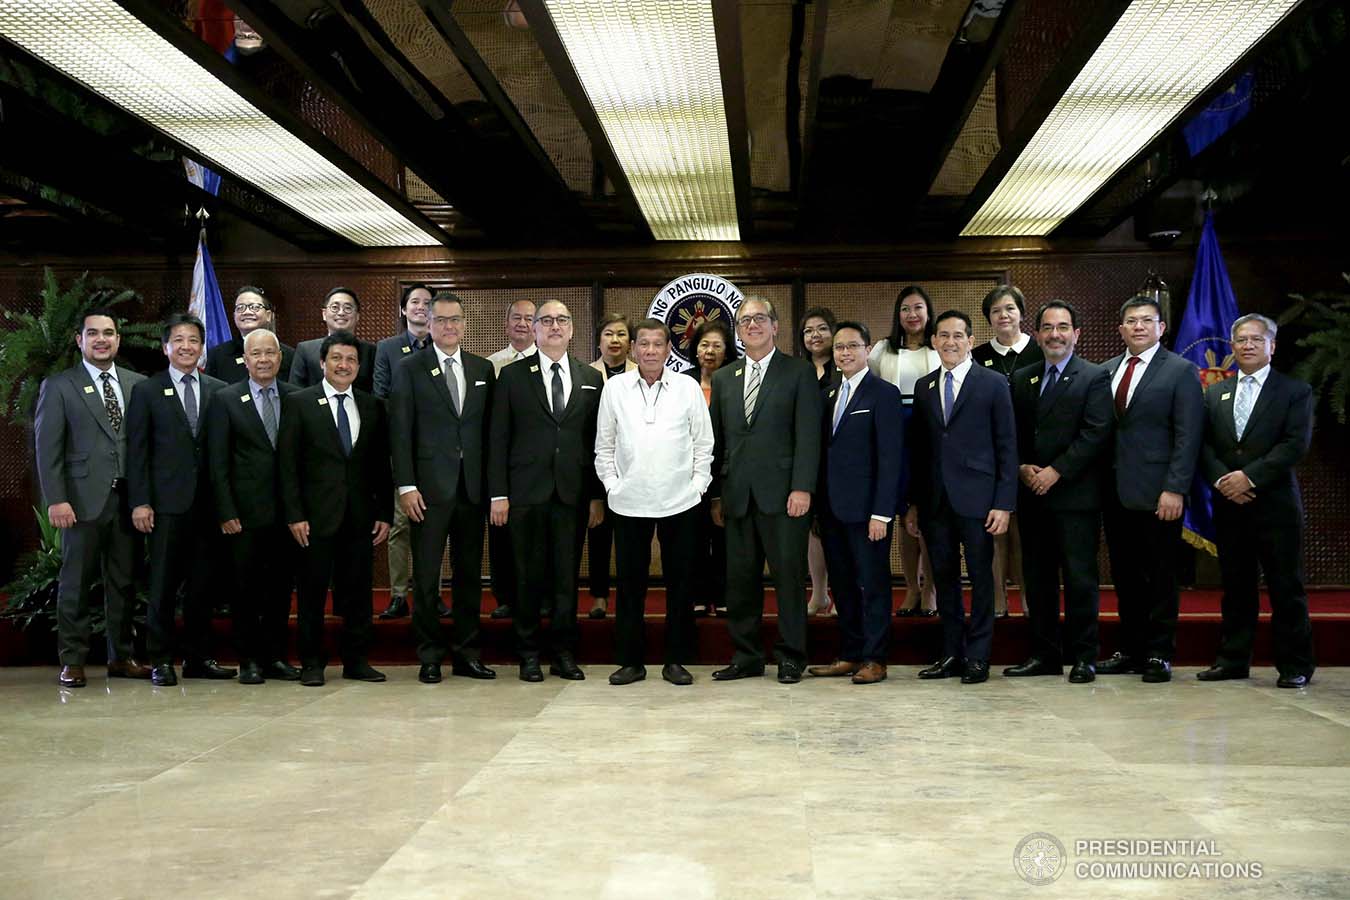 President Rodrigo Roa Duterte poses for posterity with the newly elected officers and board of trustees of the Kapisanan ng mga Brodkaster ng Pilipinas (KBP) during the oath-taking ceremony at the Malacañan Palace on February 12, 2020. SIMEON CELI JR./PRESIDENTIAL PHOTO